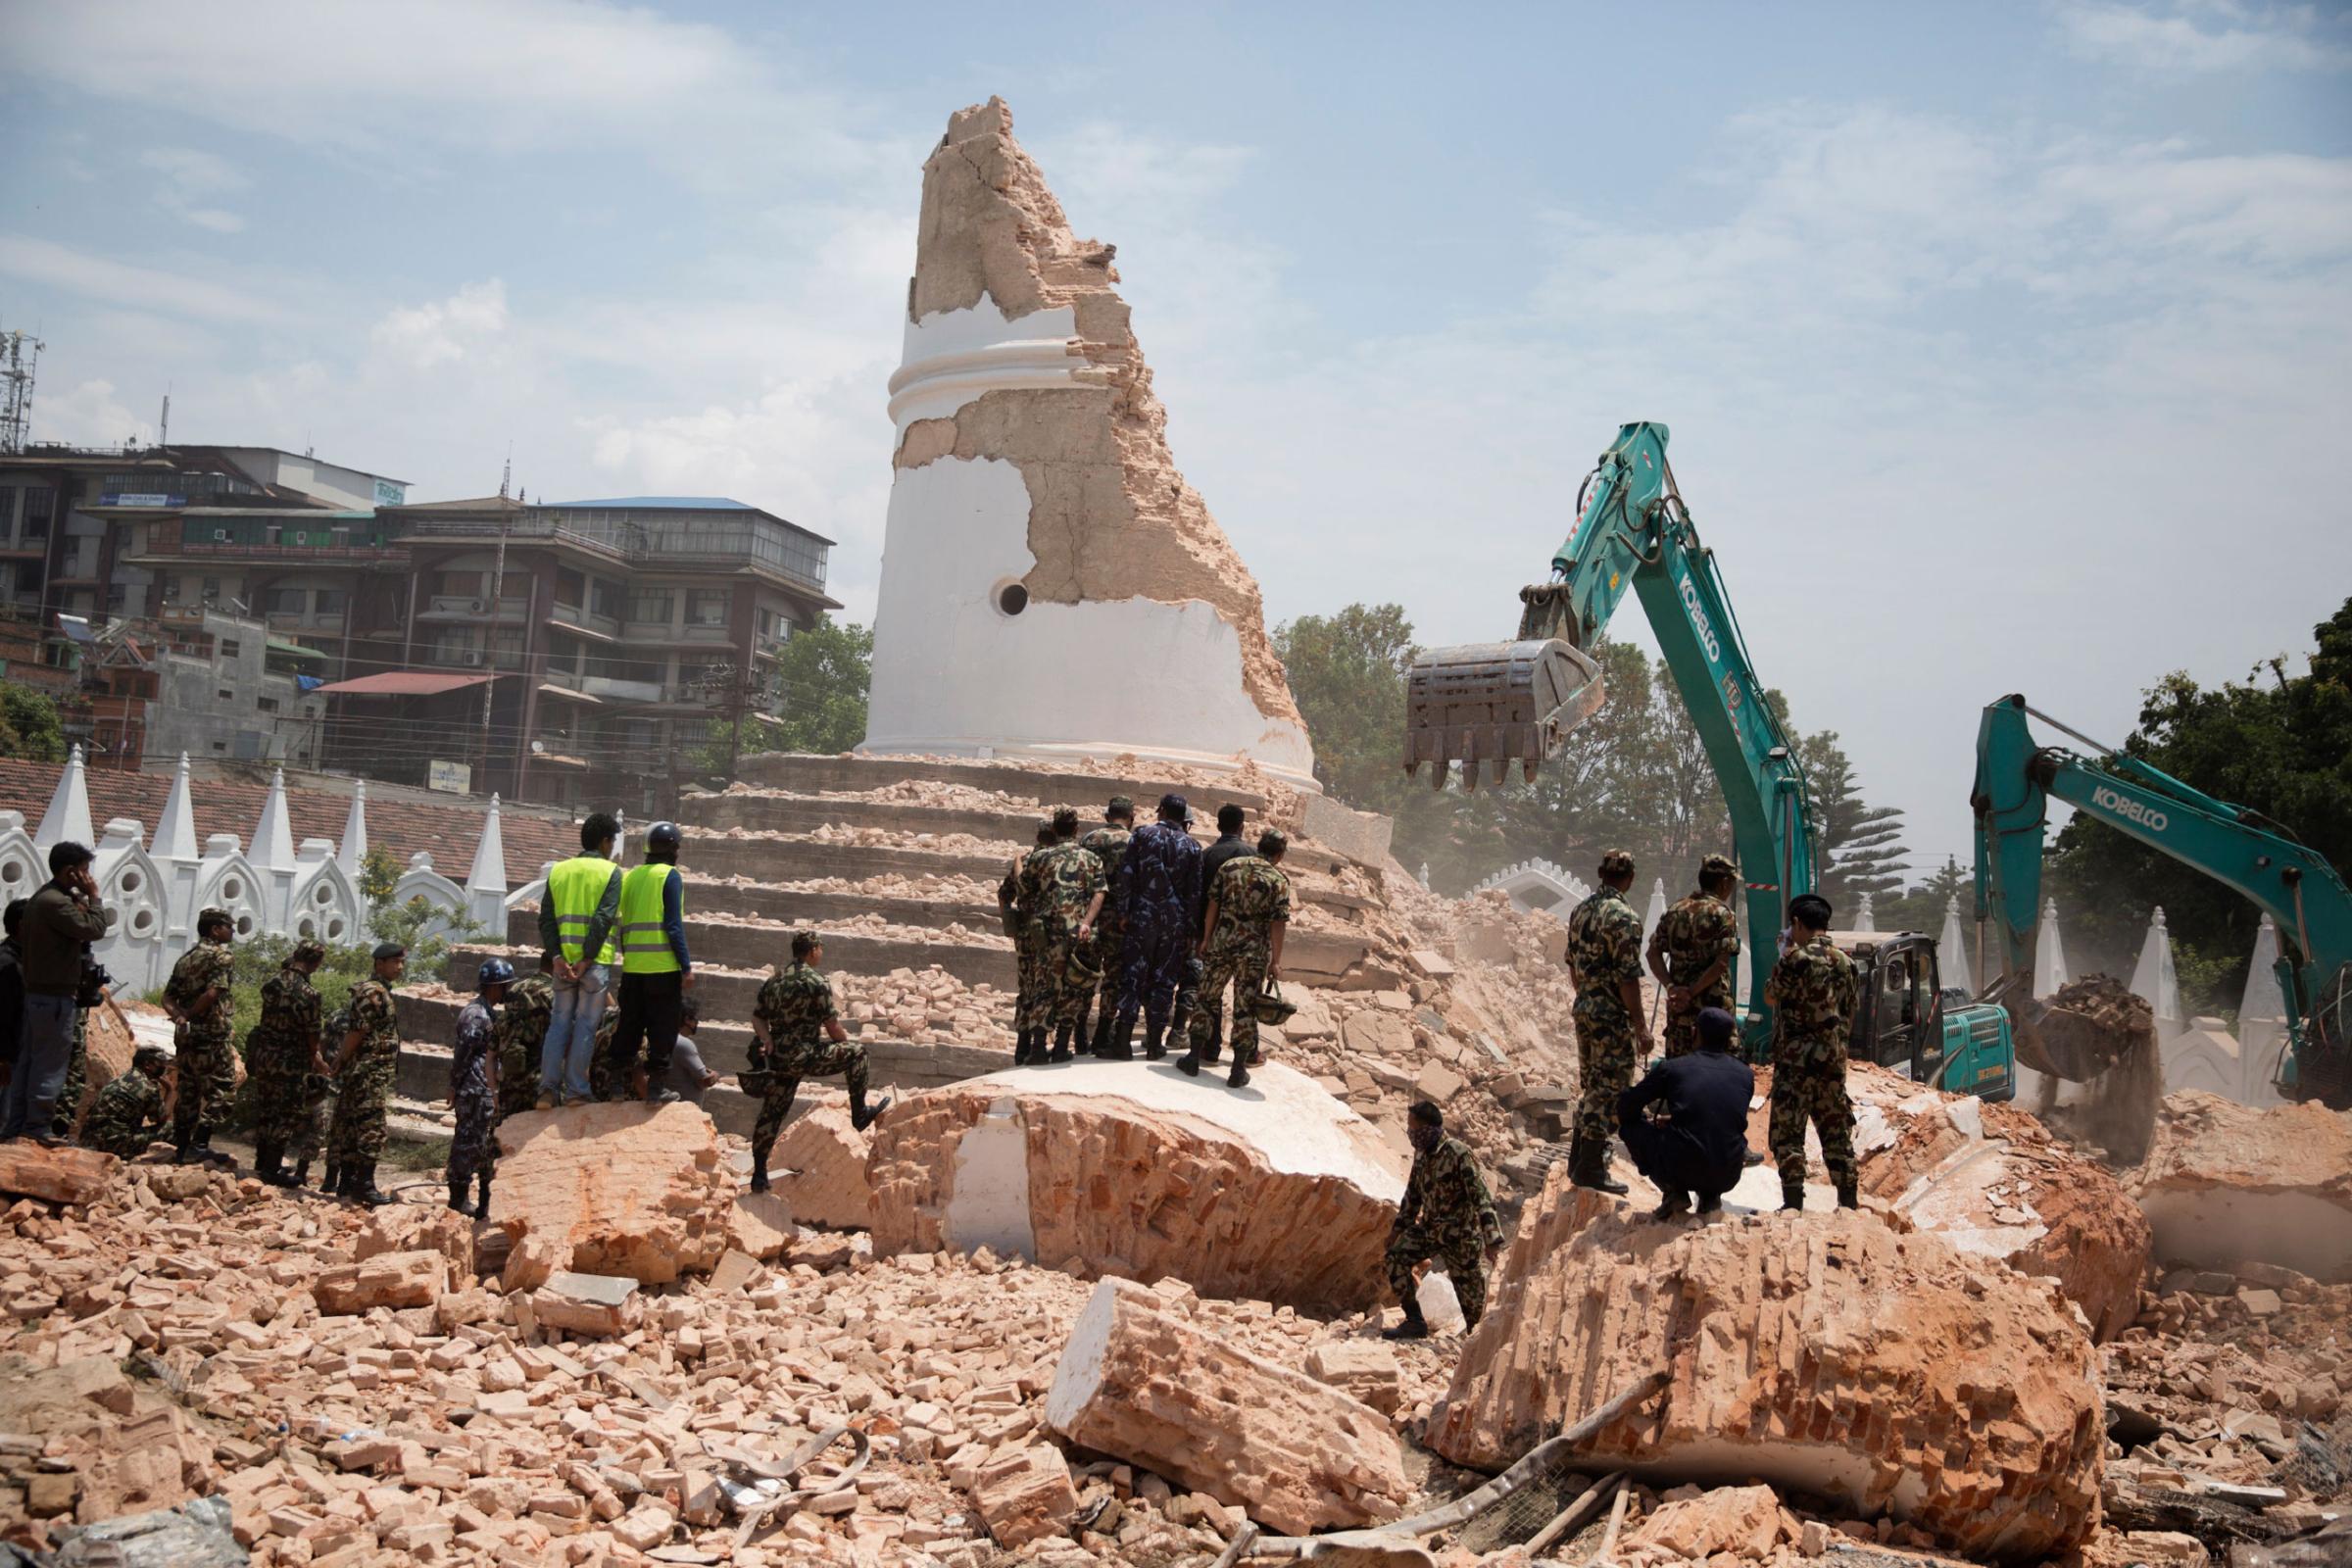 Nepali forces excavate the Dharahara tower in Kathmandu, Nepal on April. 26, 2015. This as well as historic Durbar Square, both UNESCO world heritage sites, were severely damaged in an earthquake on April 25th. Photo by Adam Ferguson for Time